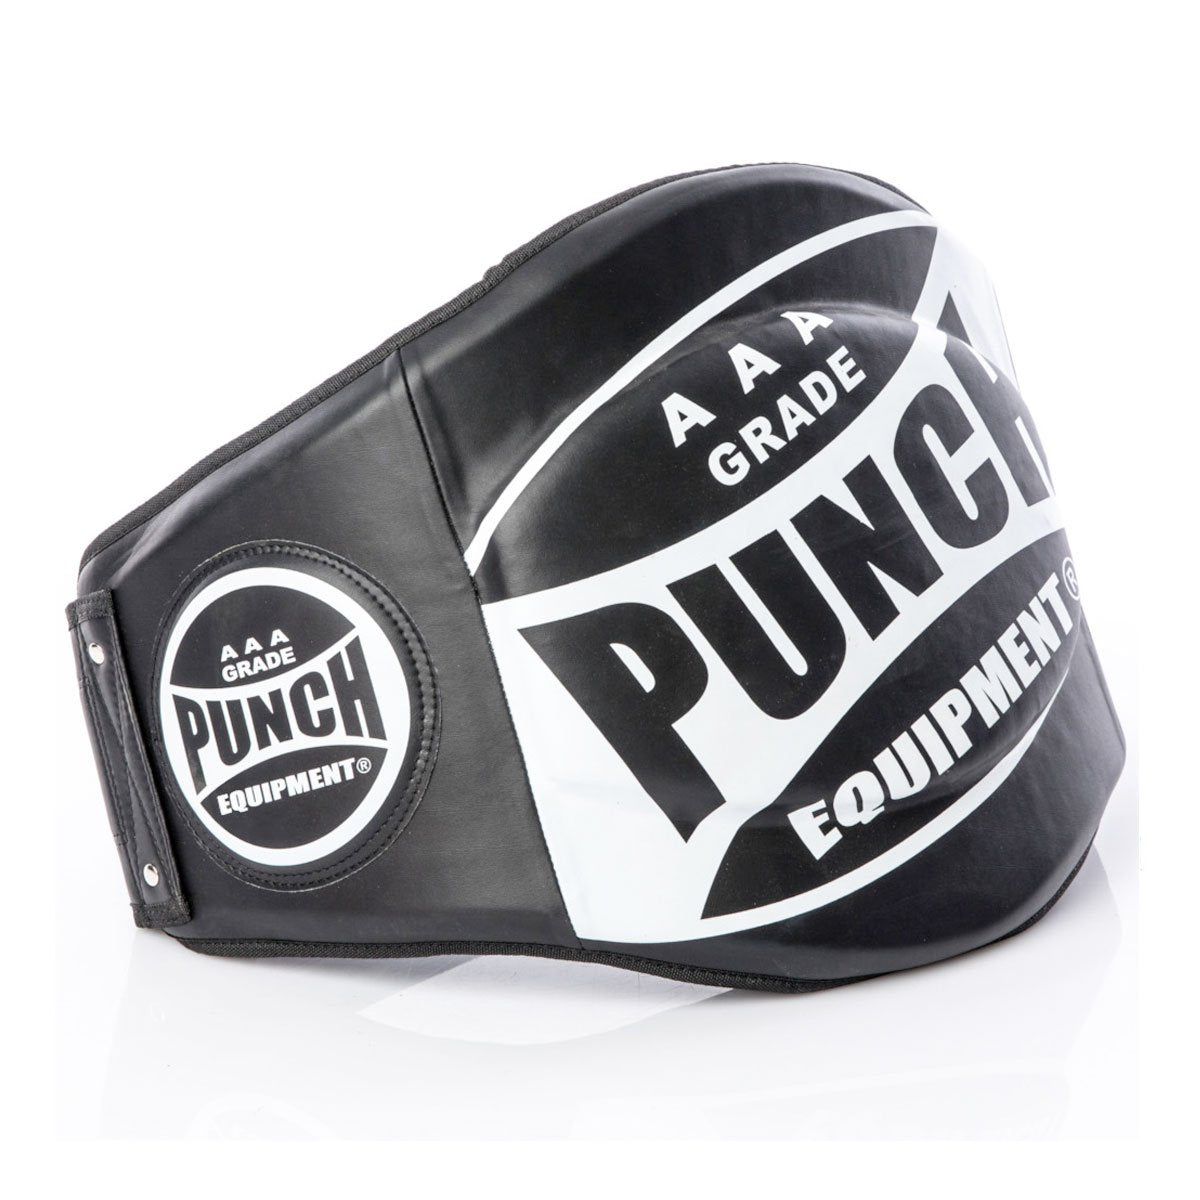 Punch Equipment Trophy Getters Boxing Belly Pad Training Gear Punch Equipment Tactical Gear Supplier Tactical Distributors Australia